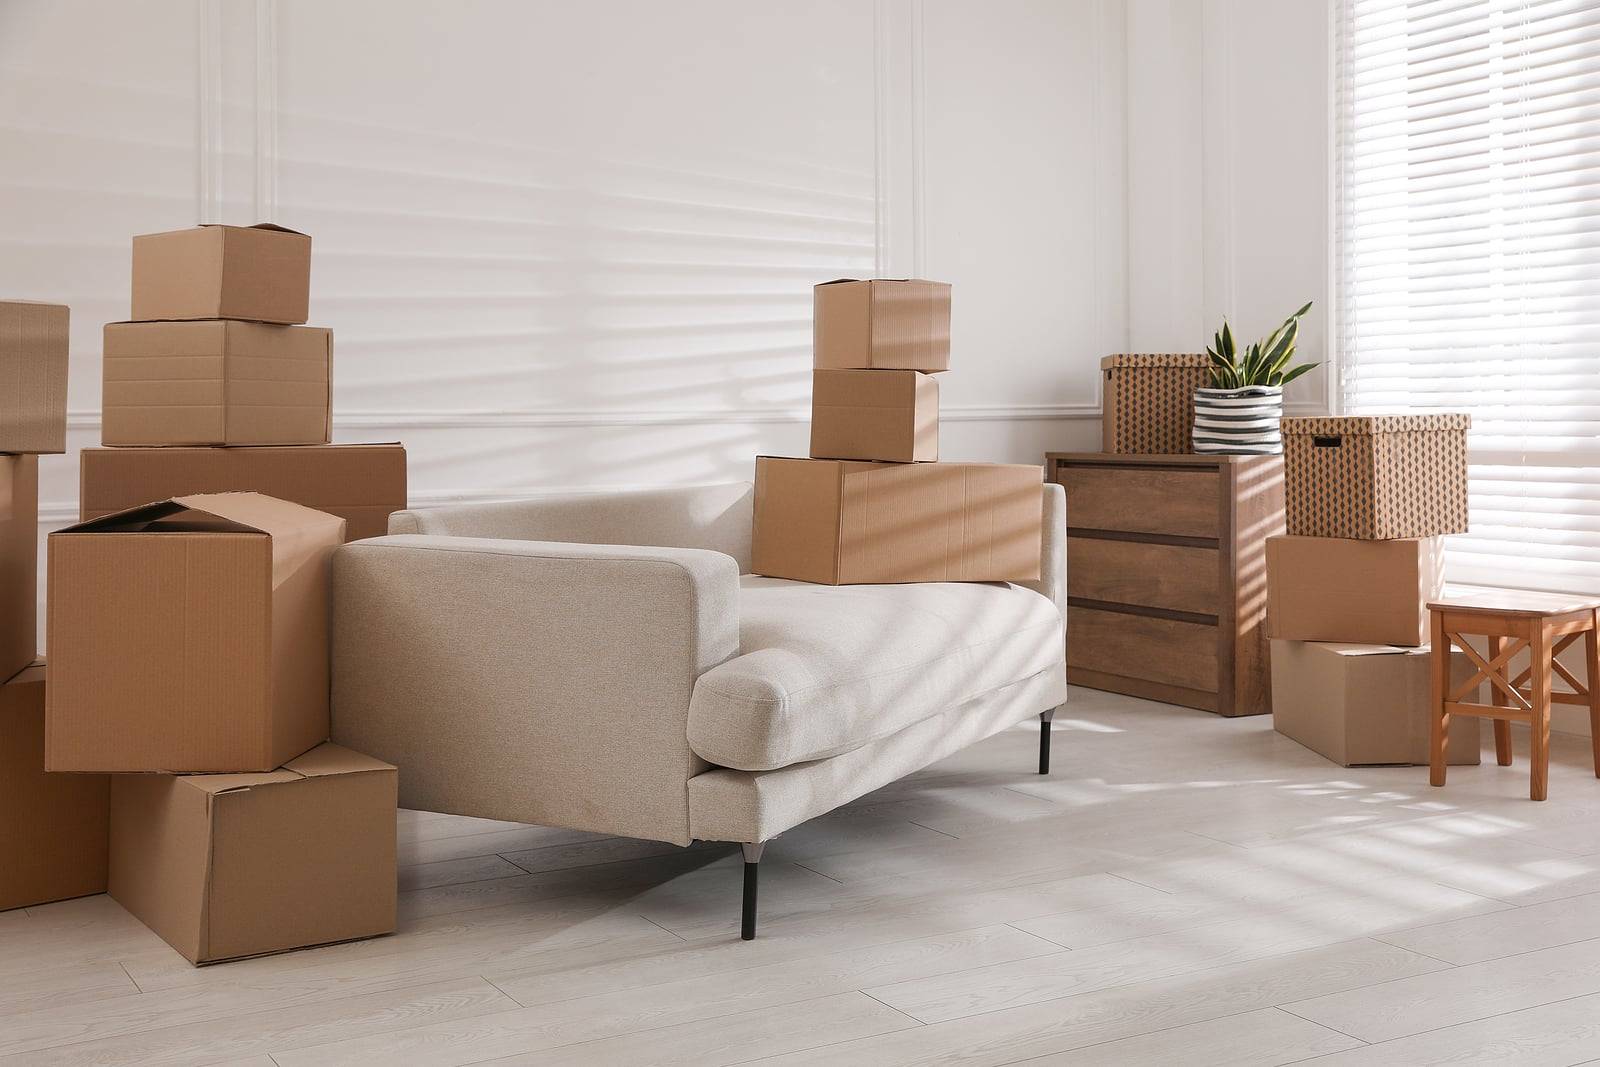 4 Common Moving Mistakes First-Timers Make 3